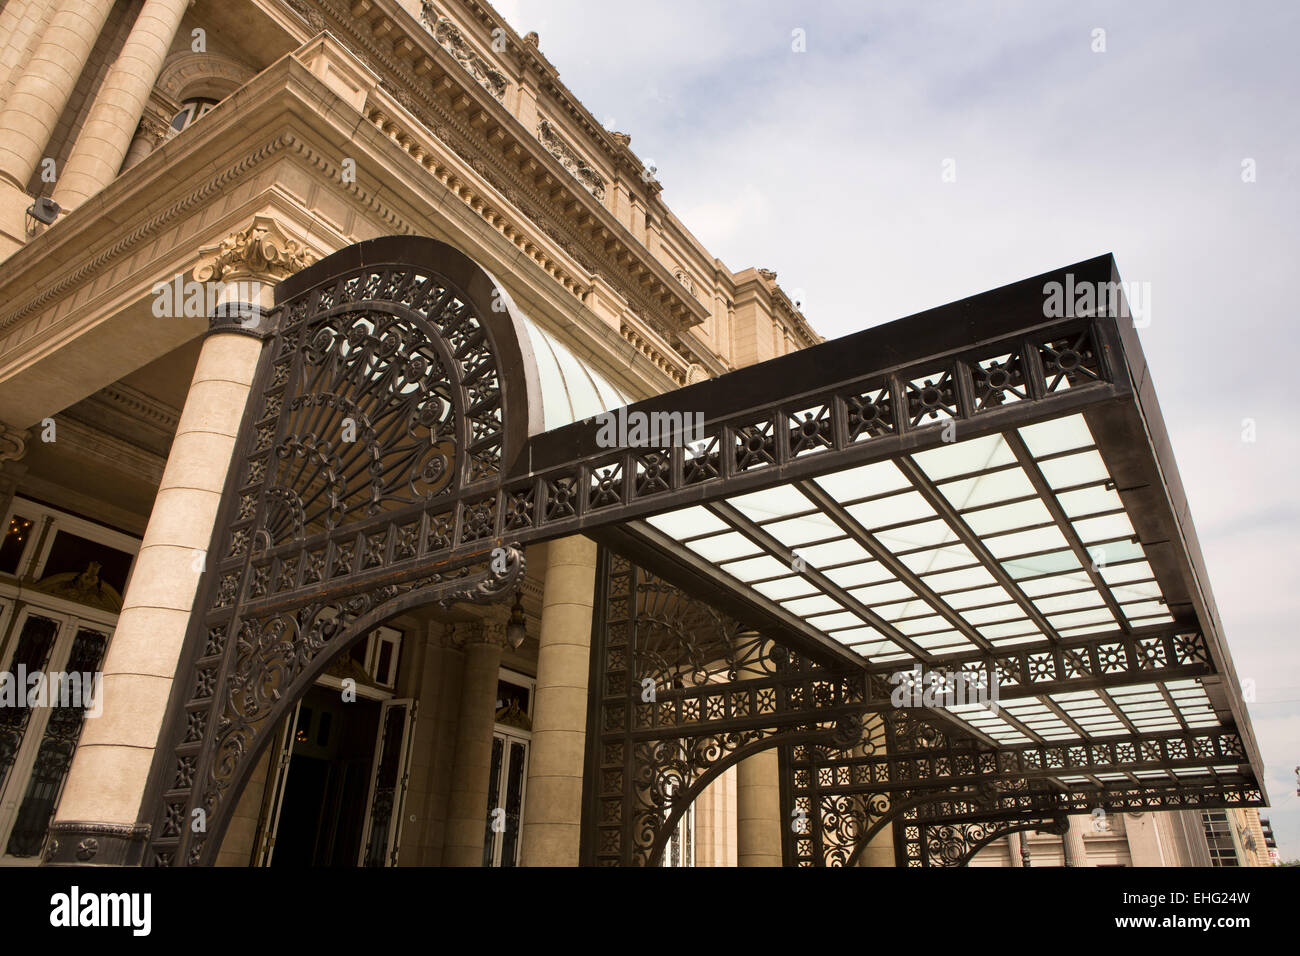 Argentina, Buenos Aires, Libertad, Teatro Colon, cast iron and glass canopy structure Stock Photo